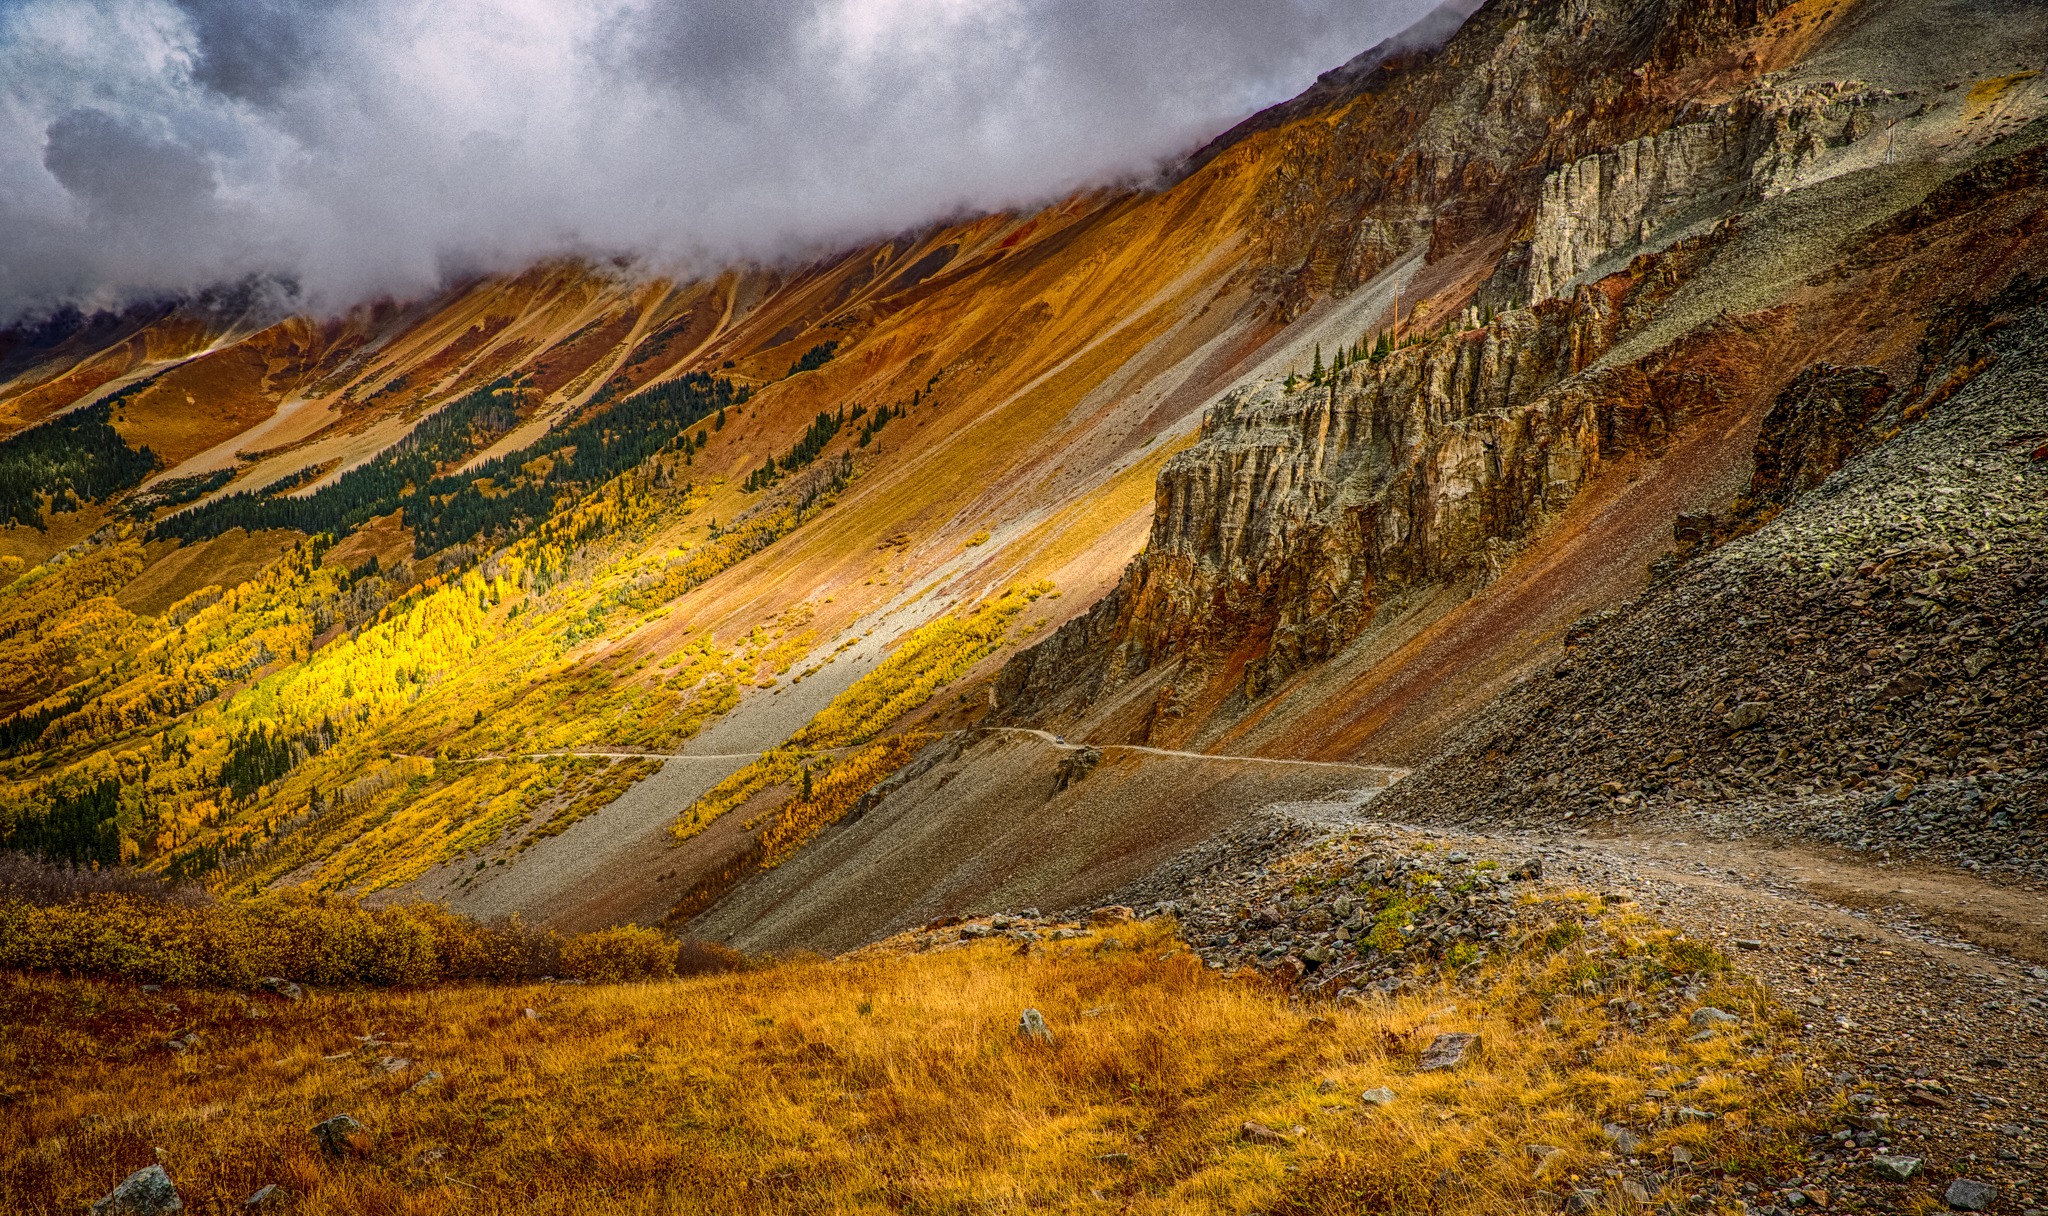 The rust and tan rocks contrast with the golden aspens along Ophir Pass Road, between US 550 and Telluride, Colorado.